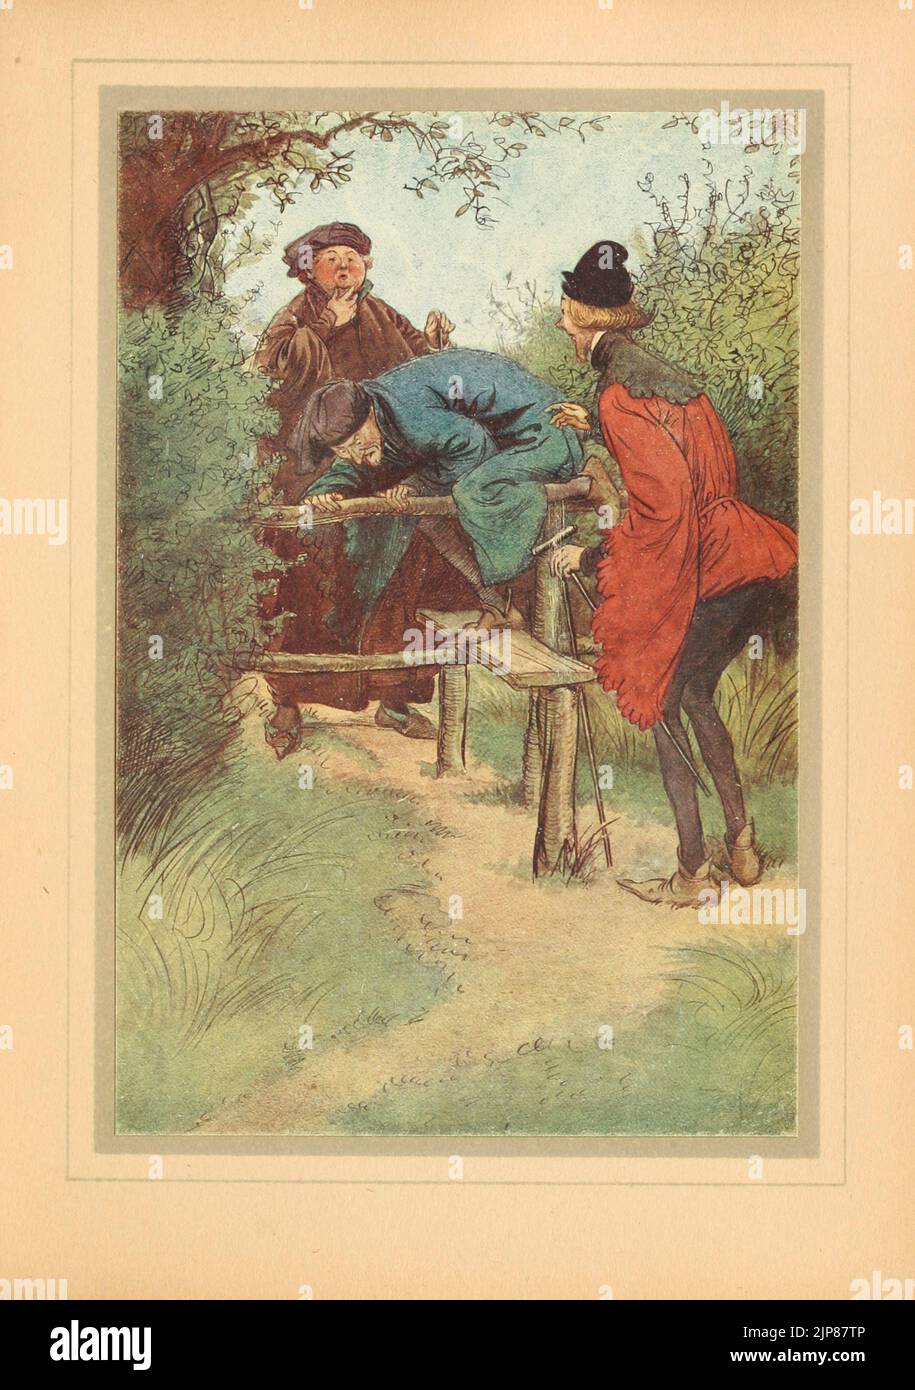 There comes my master, Master Shallow, and another gentleman, from Frogmore, over the stile this way from the book ' The merry wives of Windsor ' by  William Shakespeare Illustrated by Hugh Thomson, Publication date 1910 Publisher New York : F.A. Stokes The Merry Wives of Windsor or Sir John Falstaff and the Merry Wives of Windsor is a comedy by William Shakespeare first published in 1602, Stock Photo